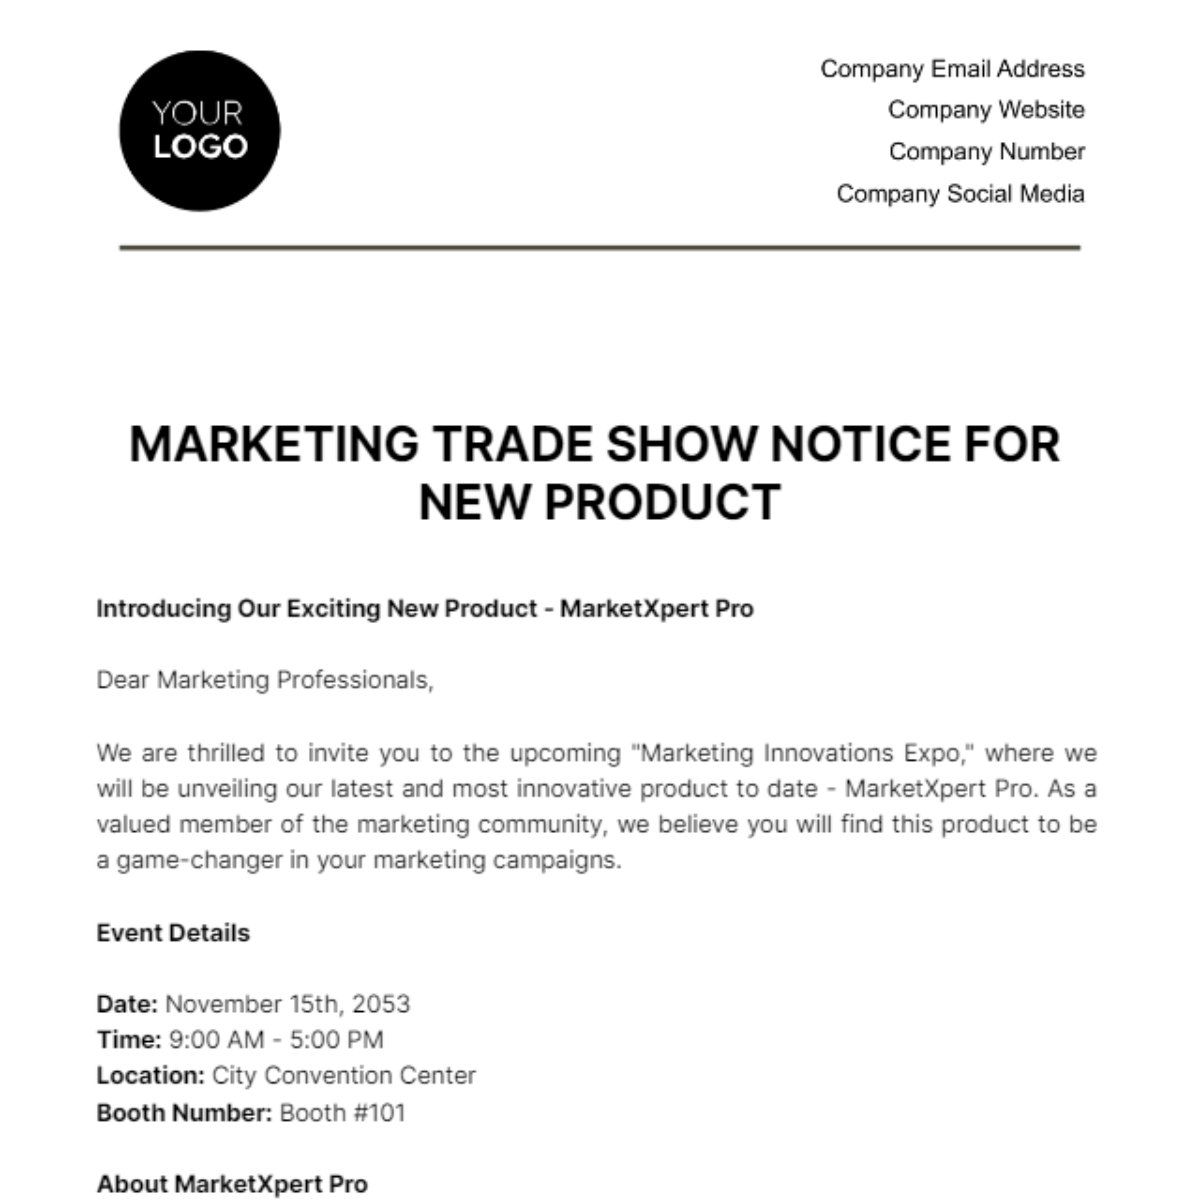 Marketing Trade Show Notice for New Product Template